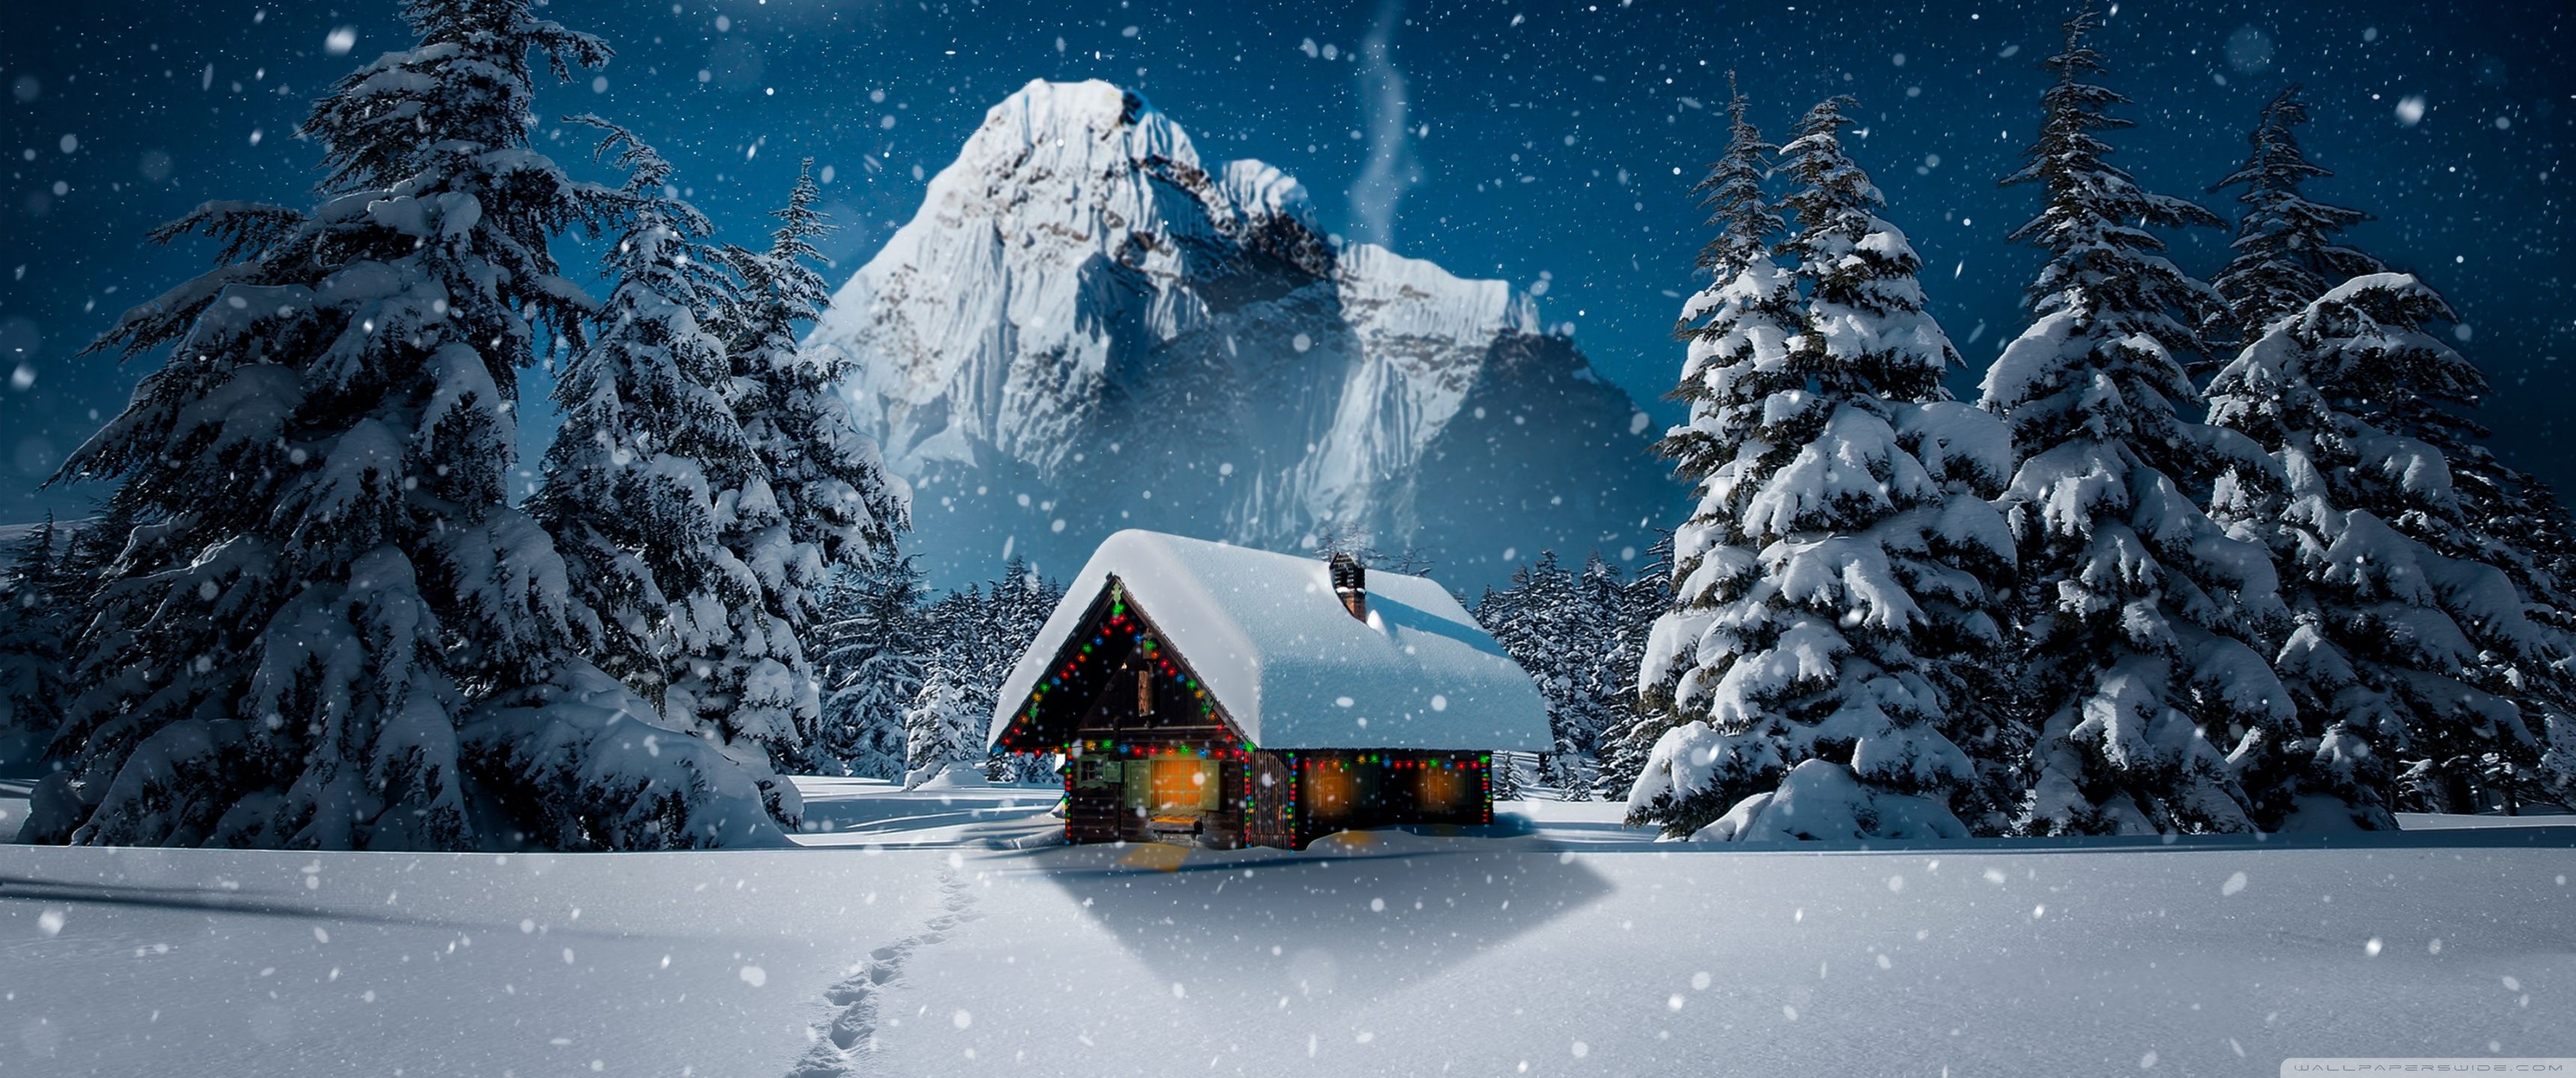 3440x1440 Christmas Wallpapers - Wallpaper Cave